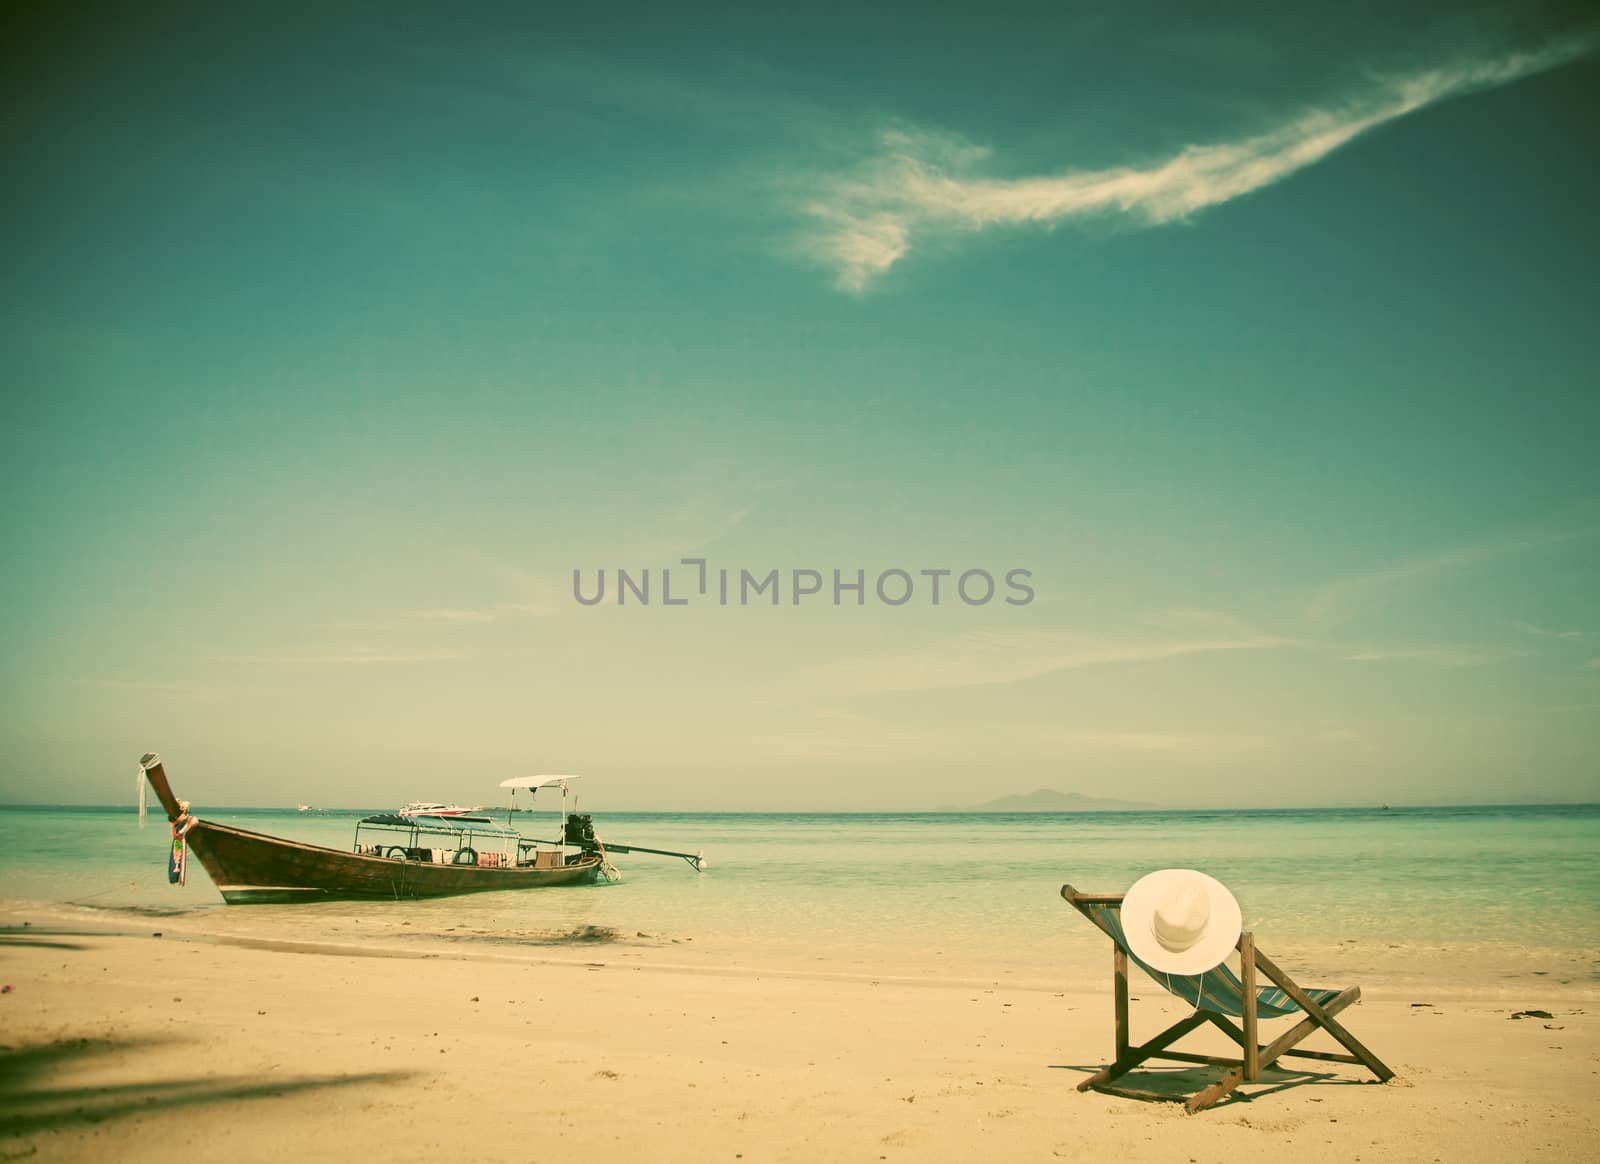 Exotic beach holiday background with beach chair and long tail boat - Thailand ocean landscape